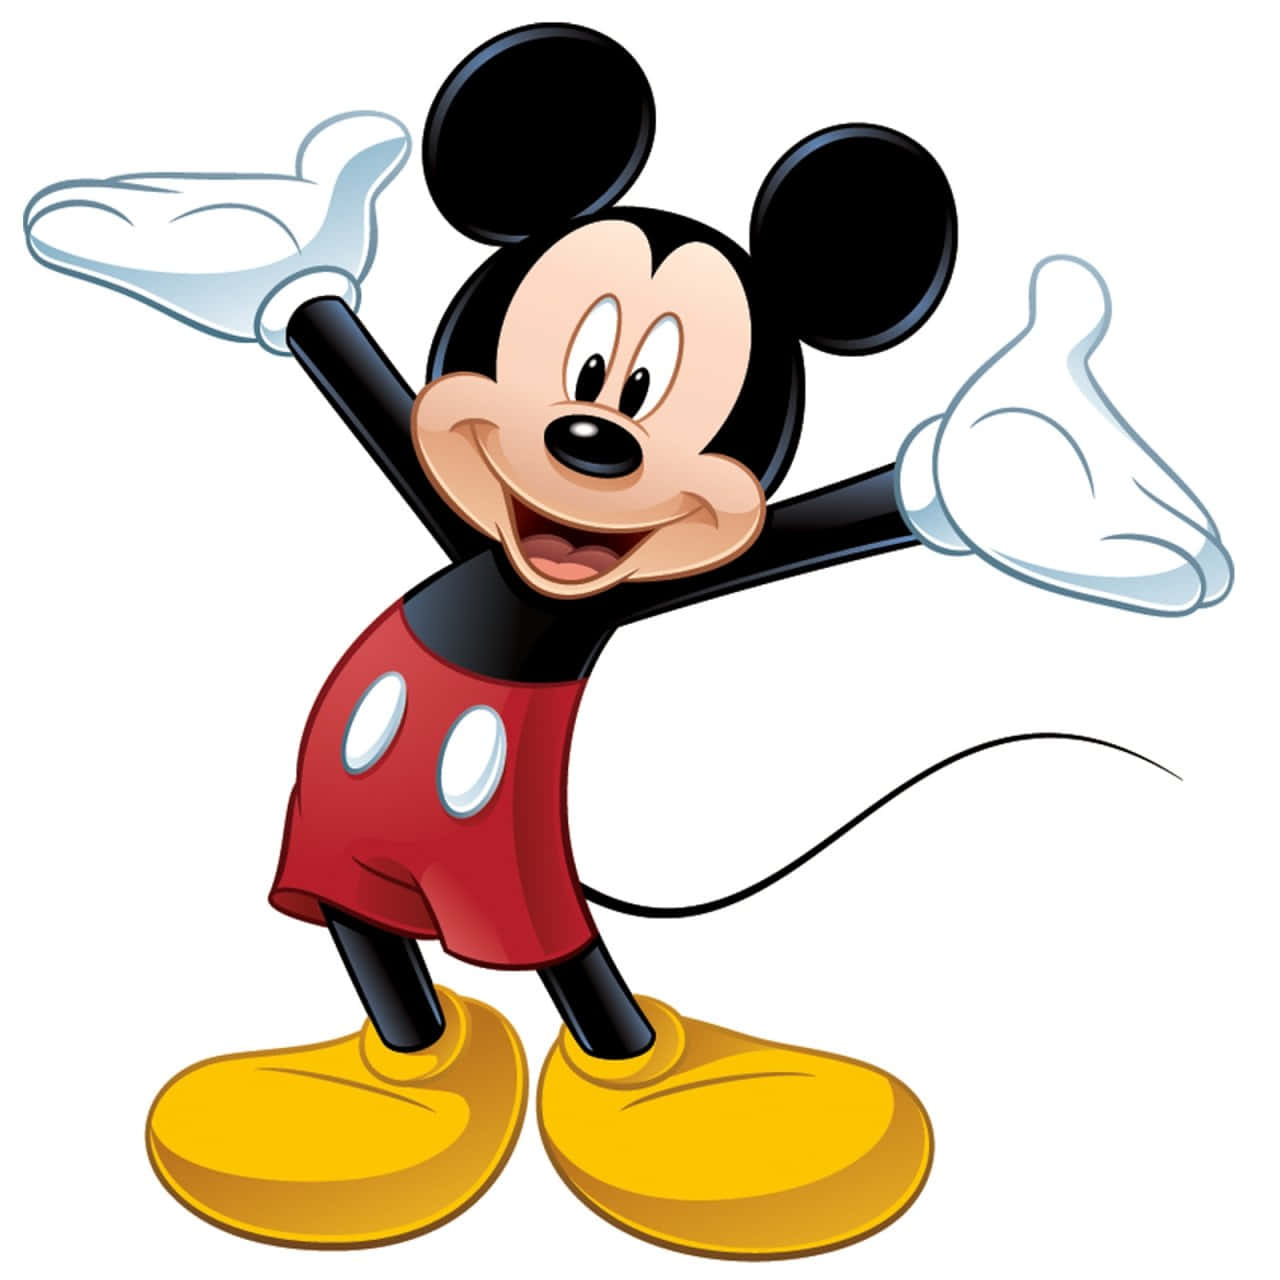 "The timeless classic Mickey Mouse always brings us joy!"